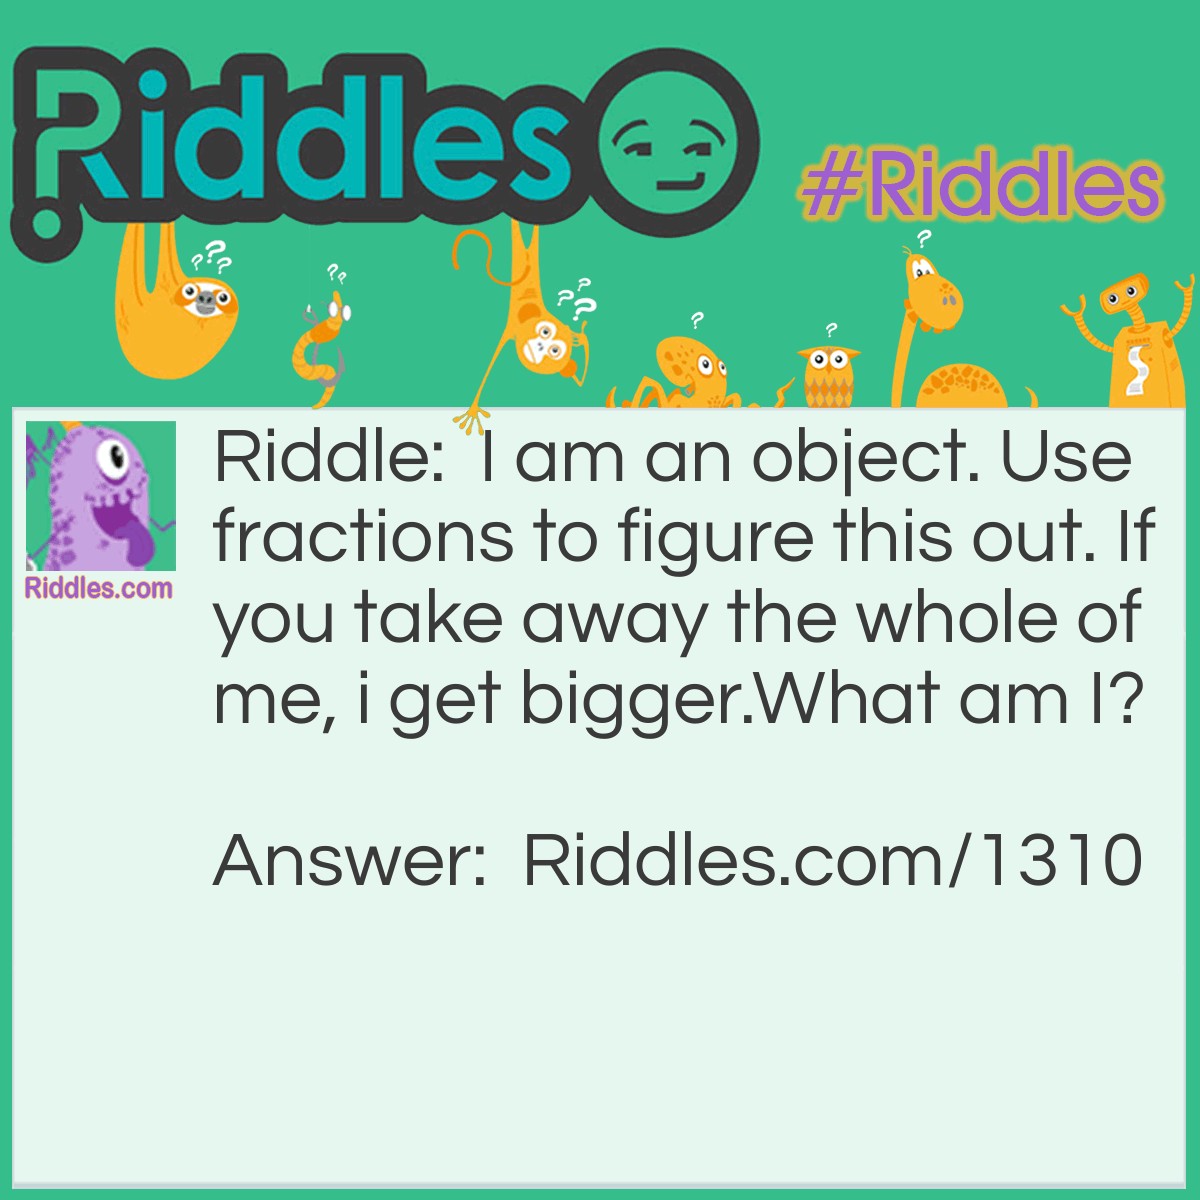 Riddle: I am an object. Use fractions to figure this out. If you take away the whole of me, I get bigger. What am I? Answer: A donut.